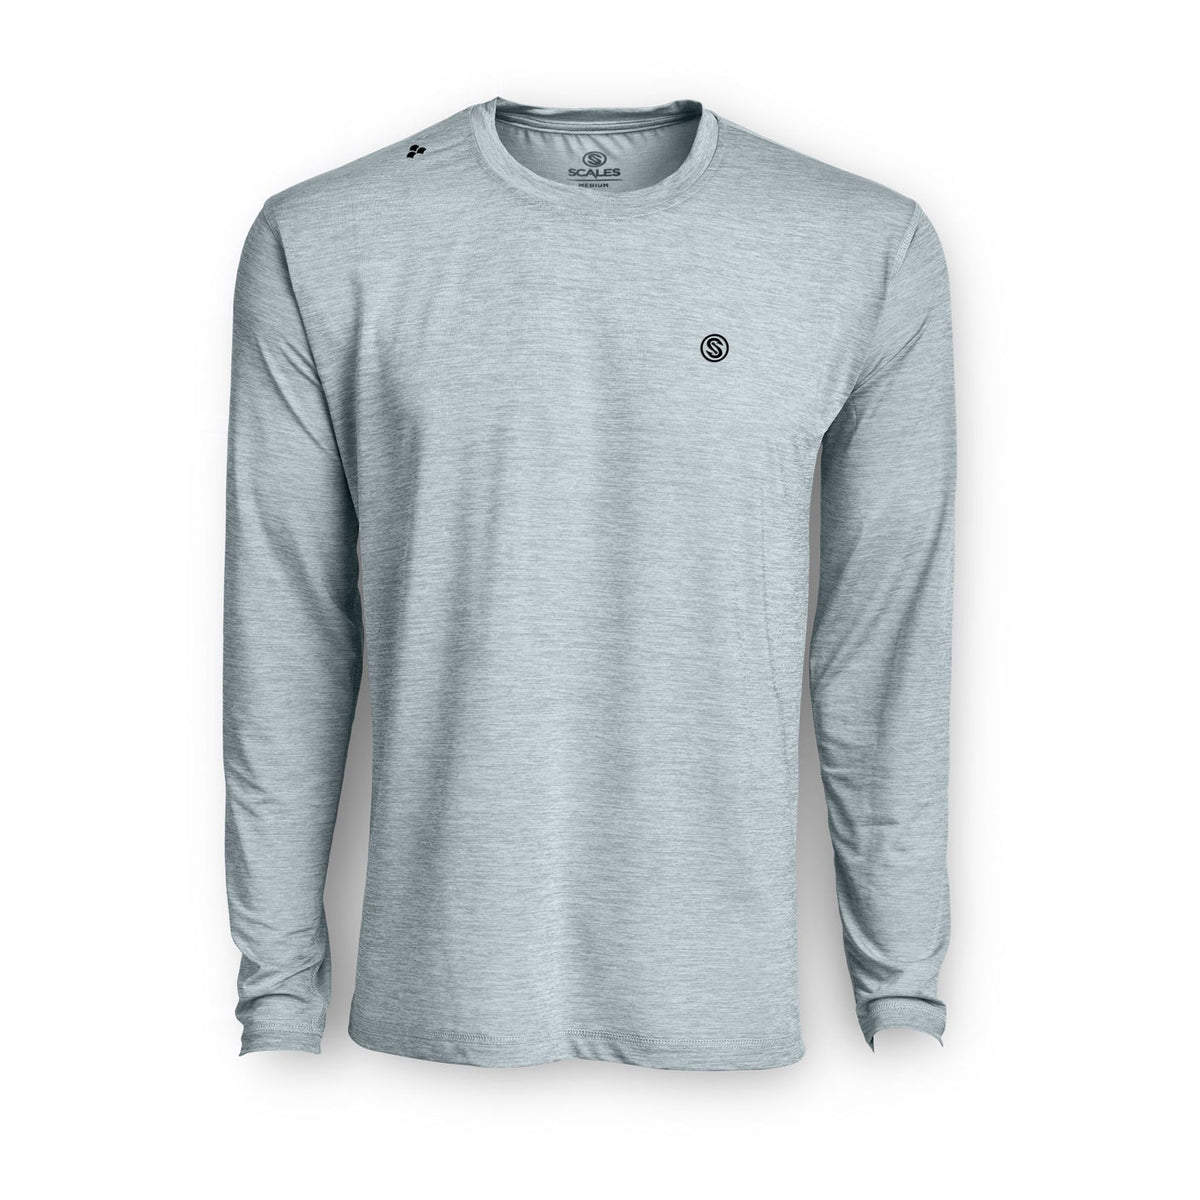 SCALES Iconic Long Sleeve Active Performance